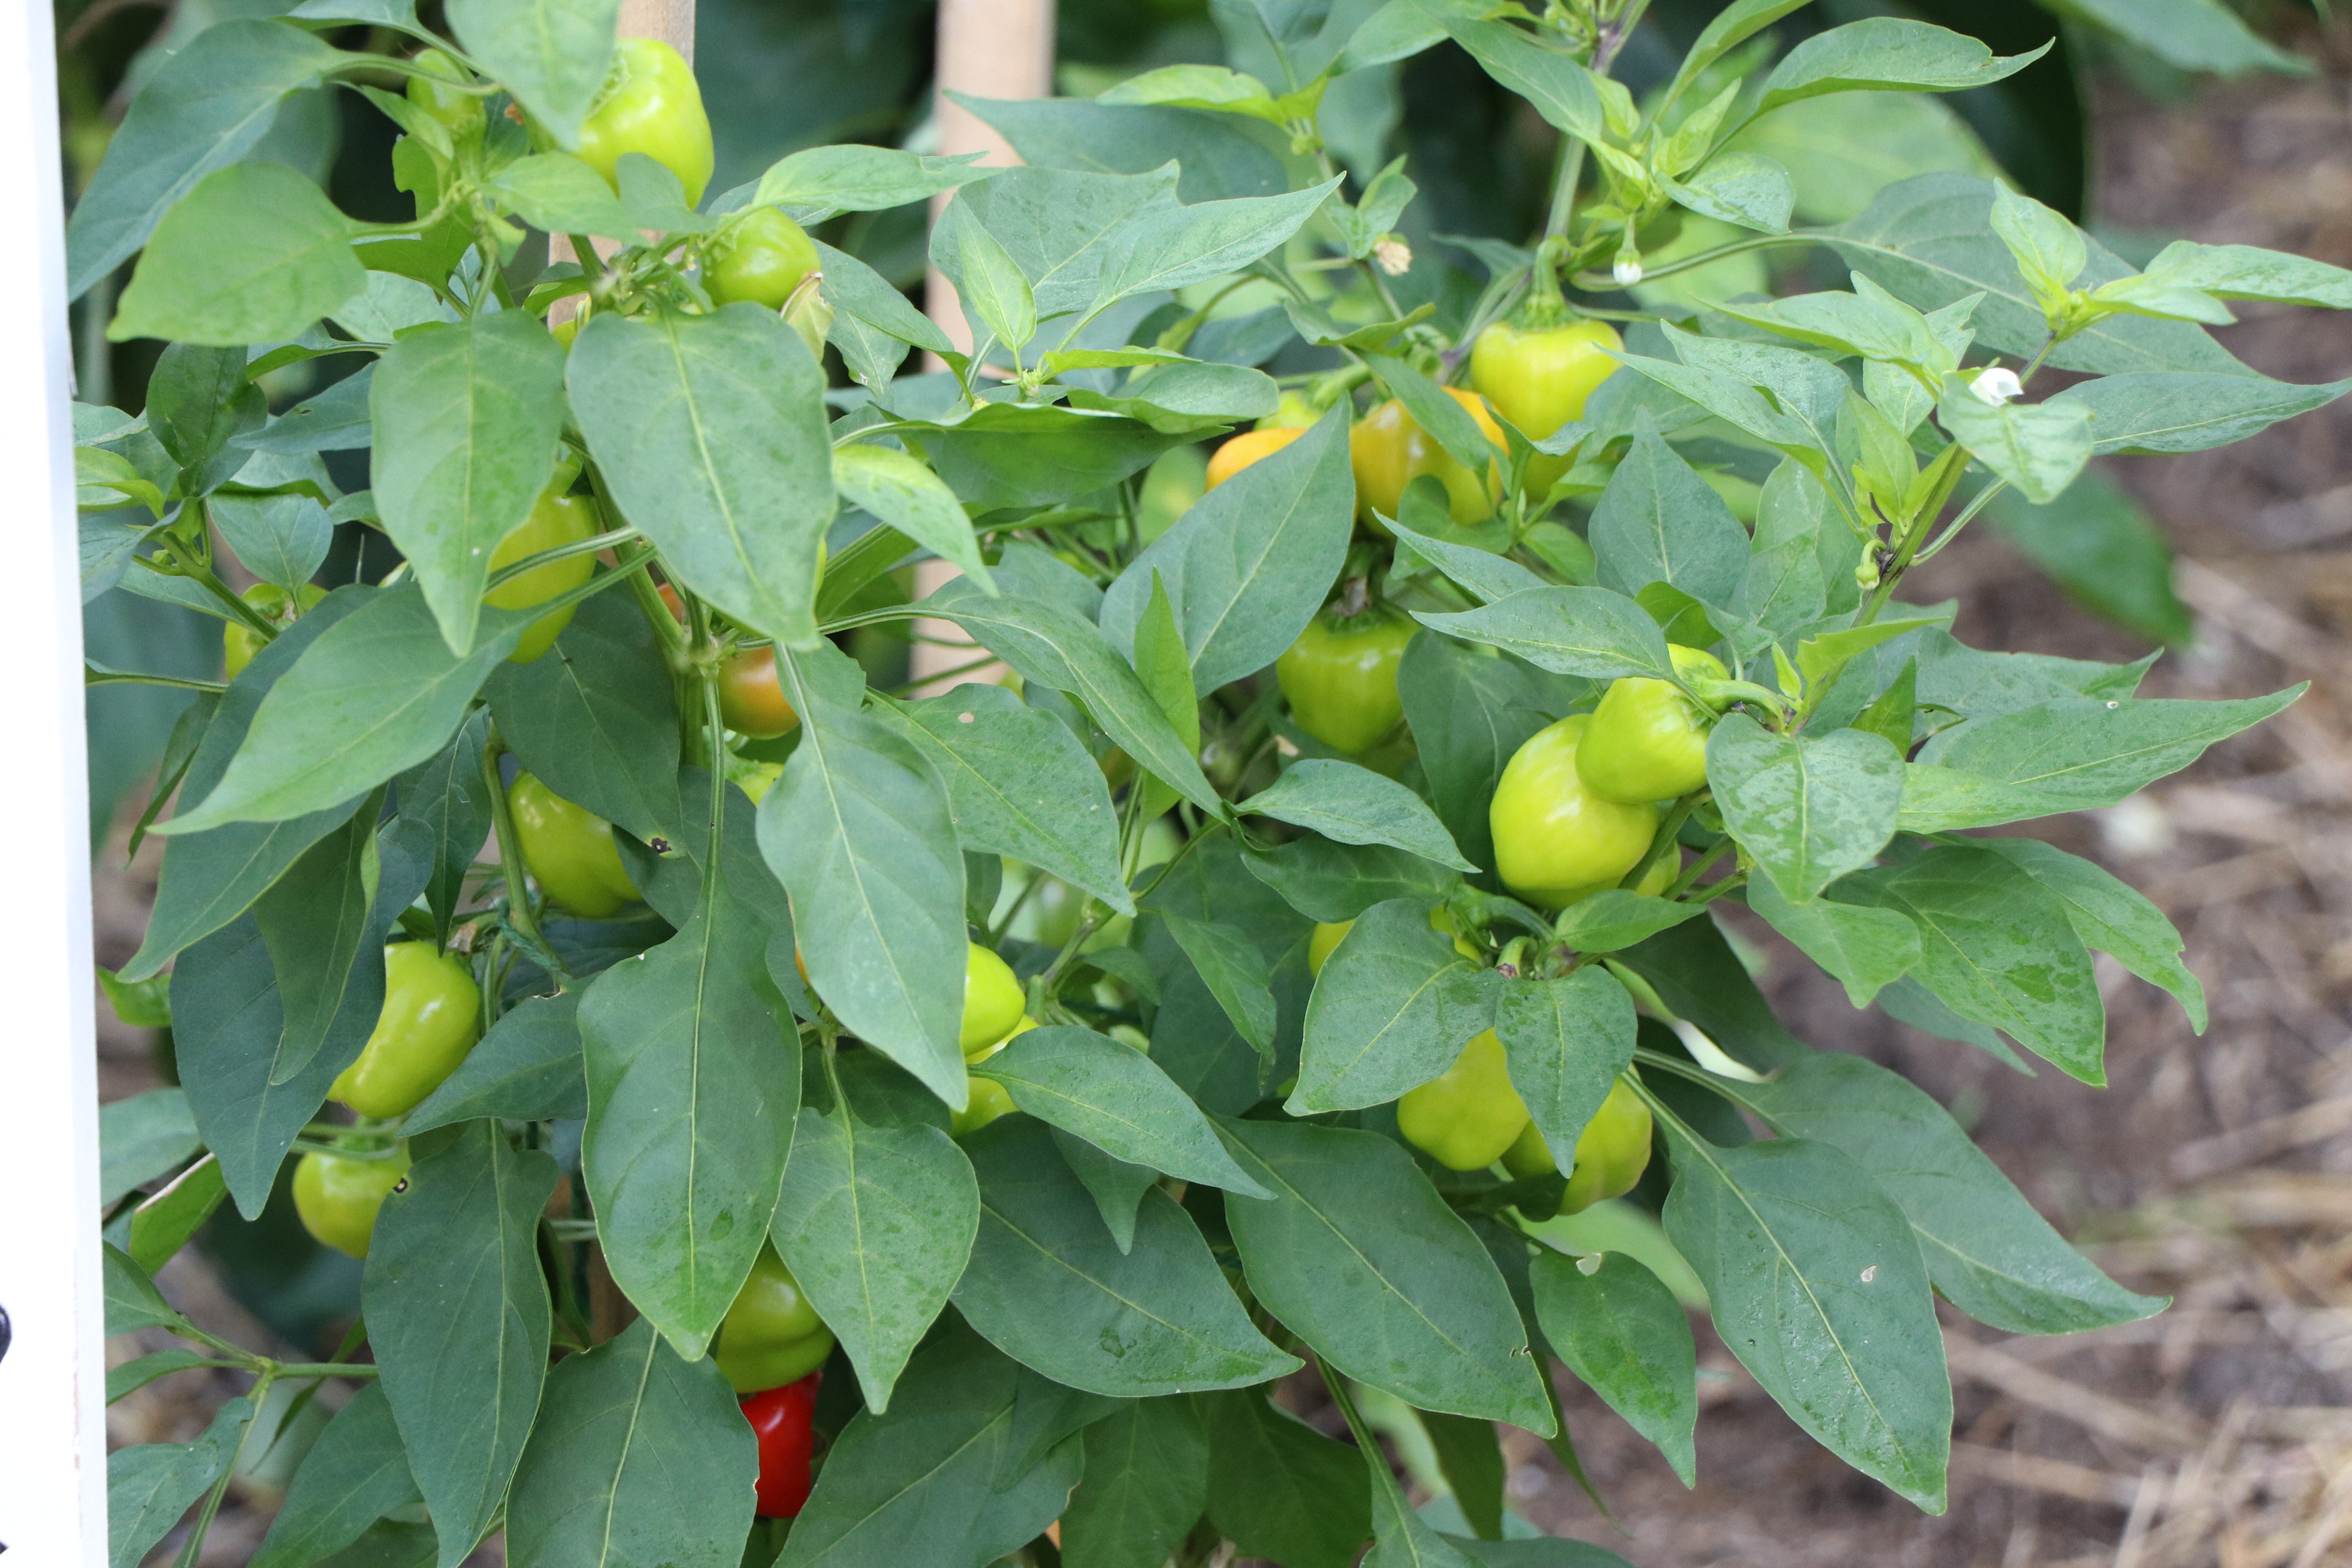 Green and red bell peppers growing on a leafy plant.